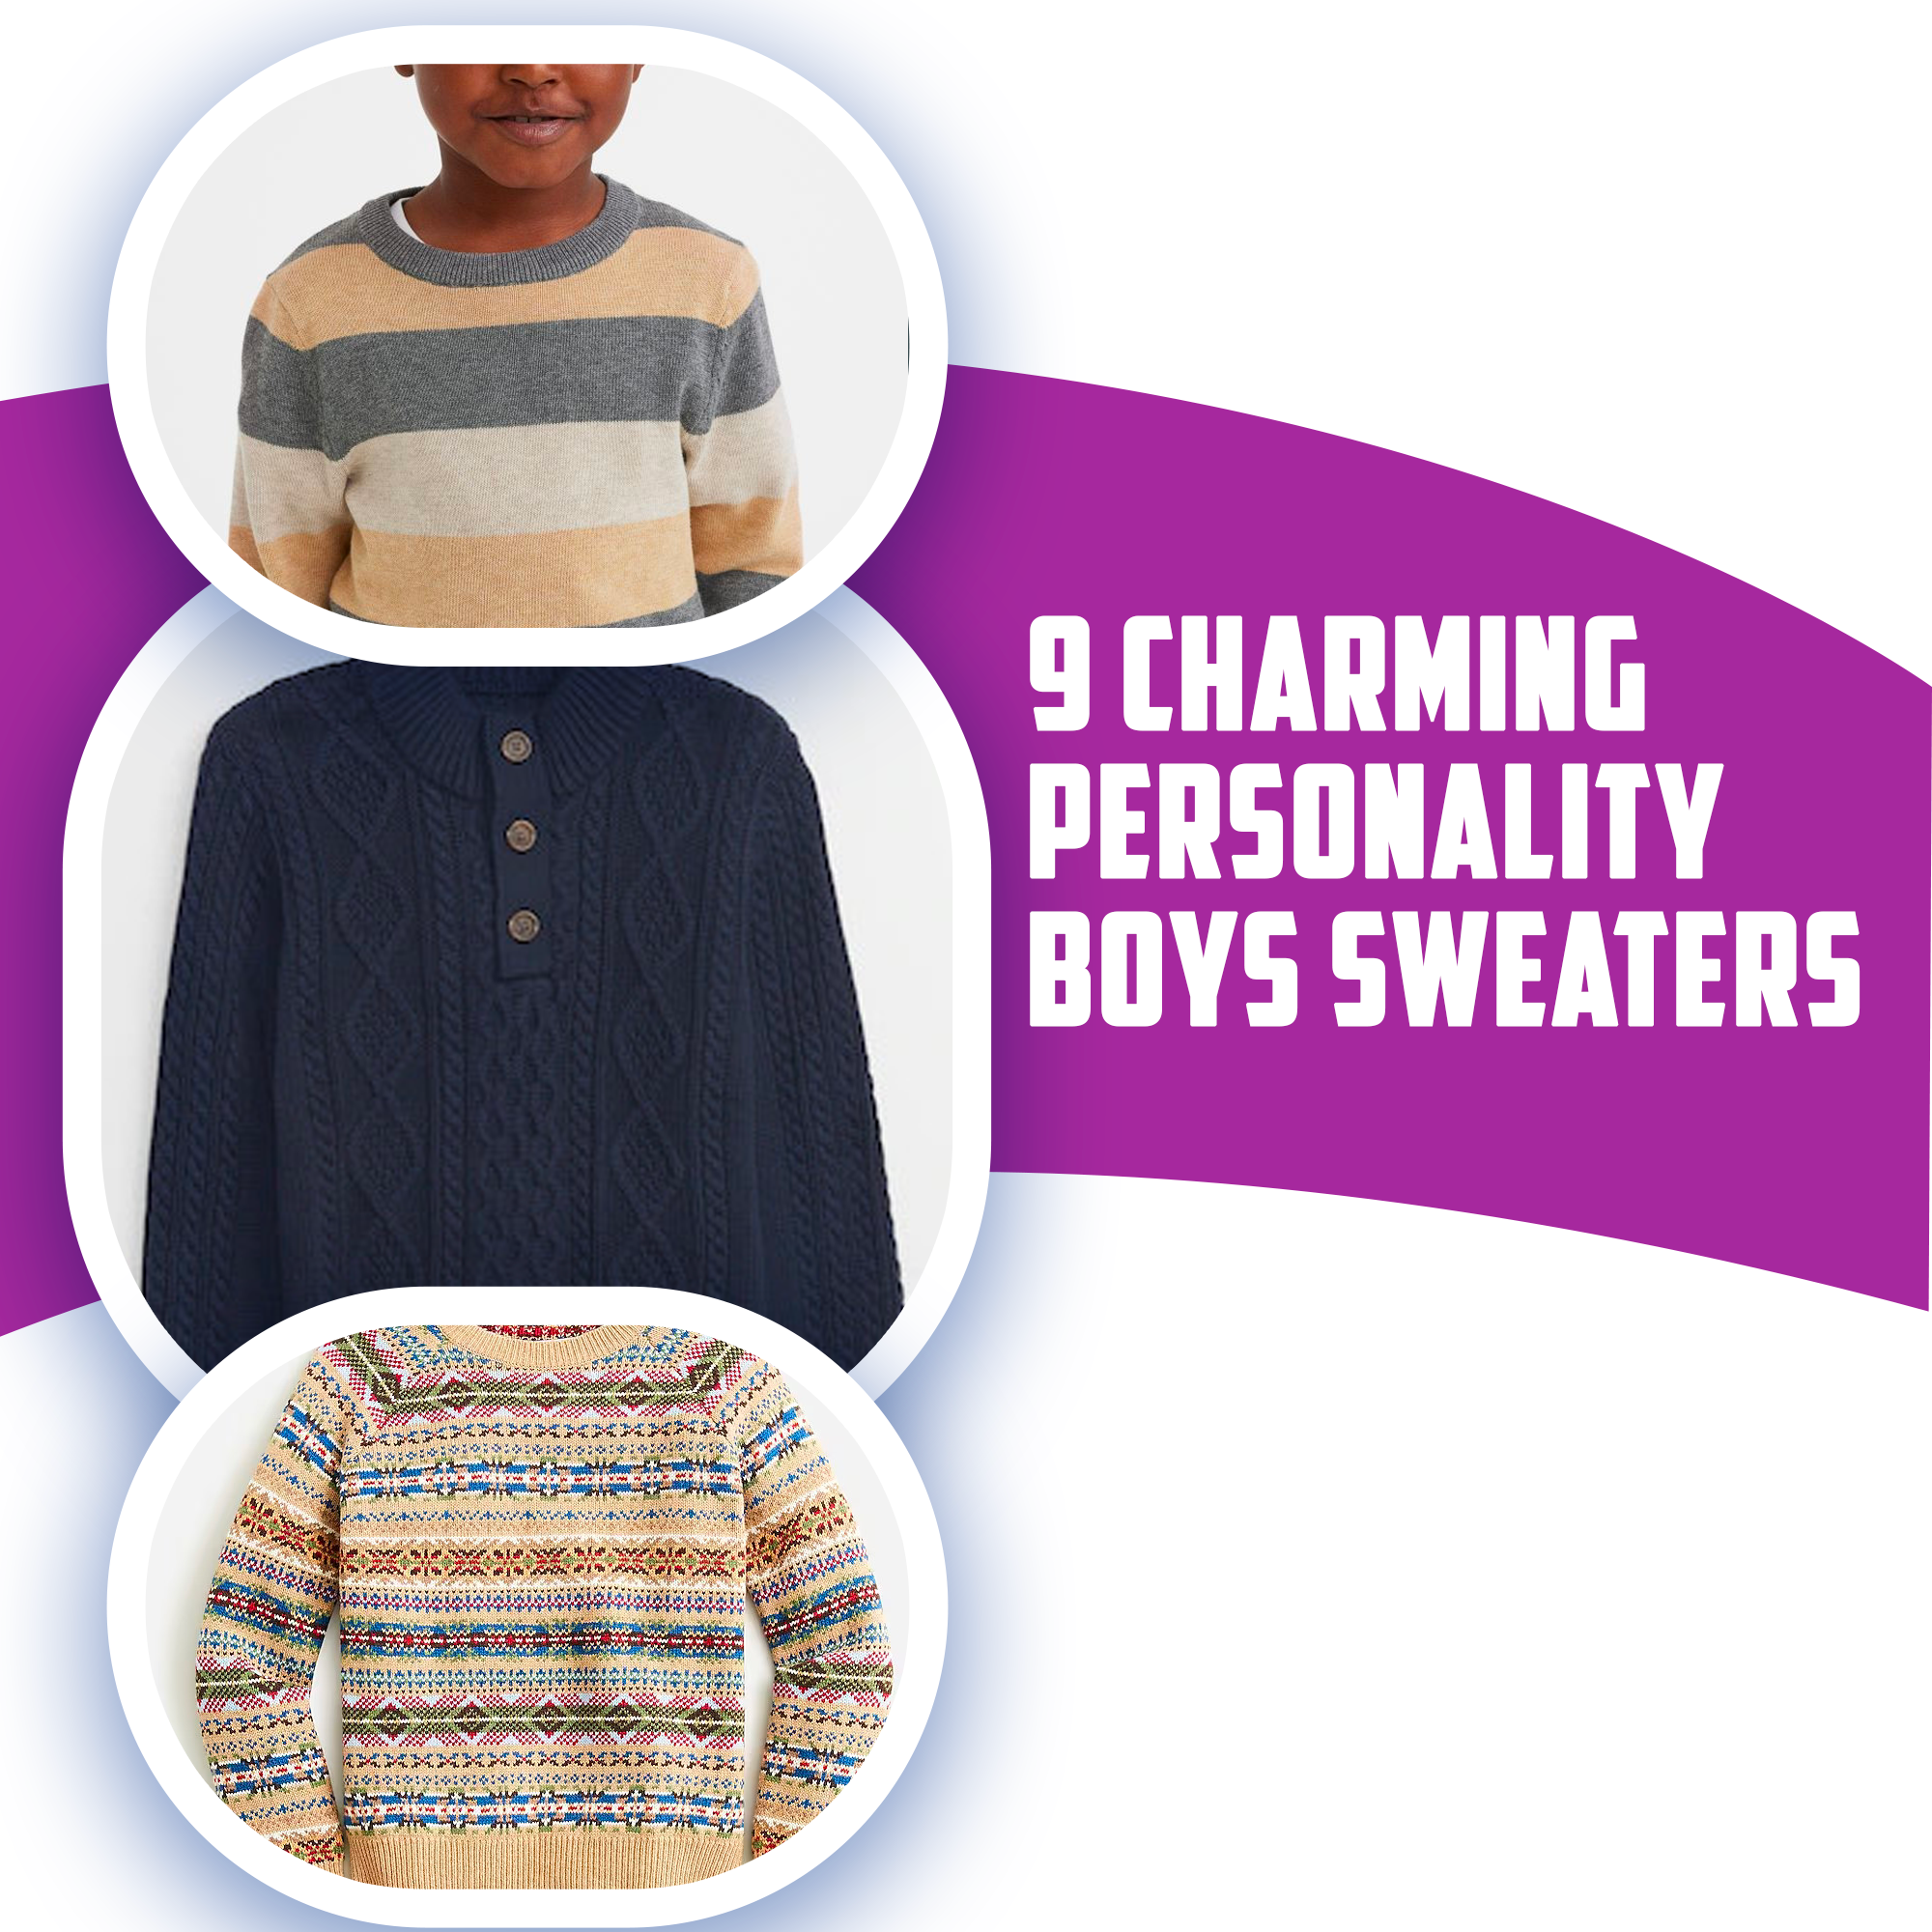 9 Charming Personality Boys Sweaters